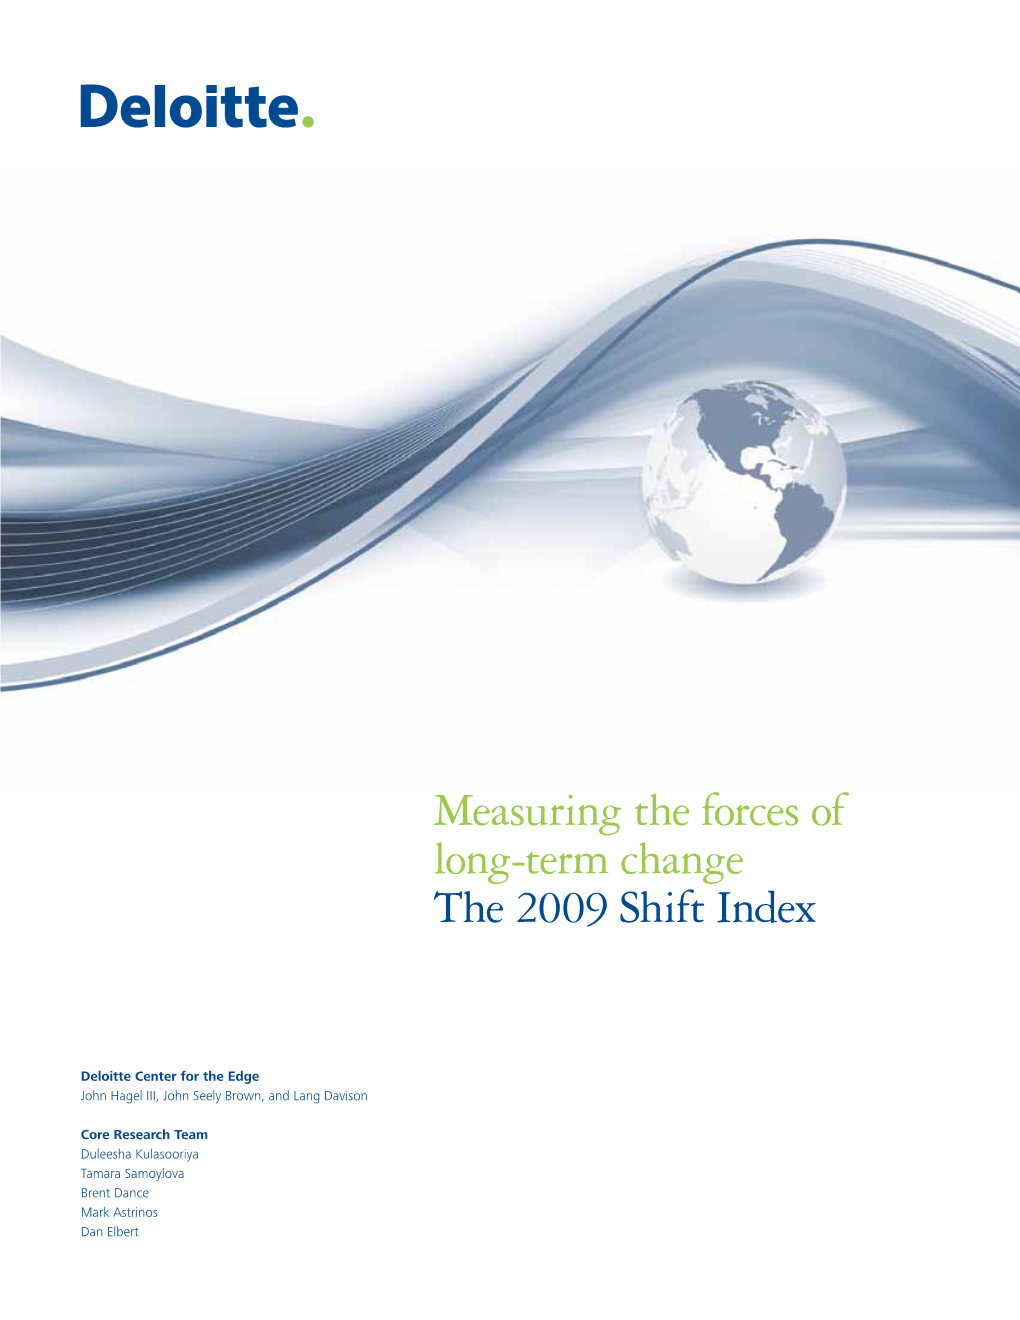 The 2009 Shift Index